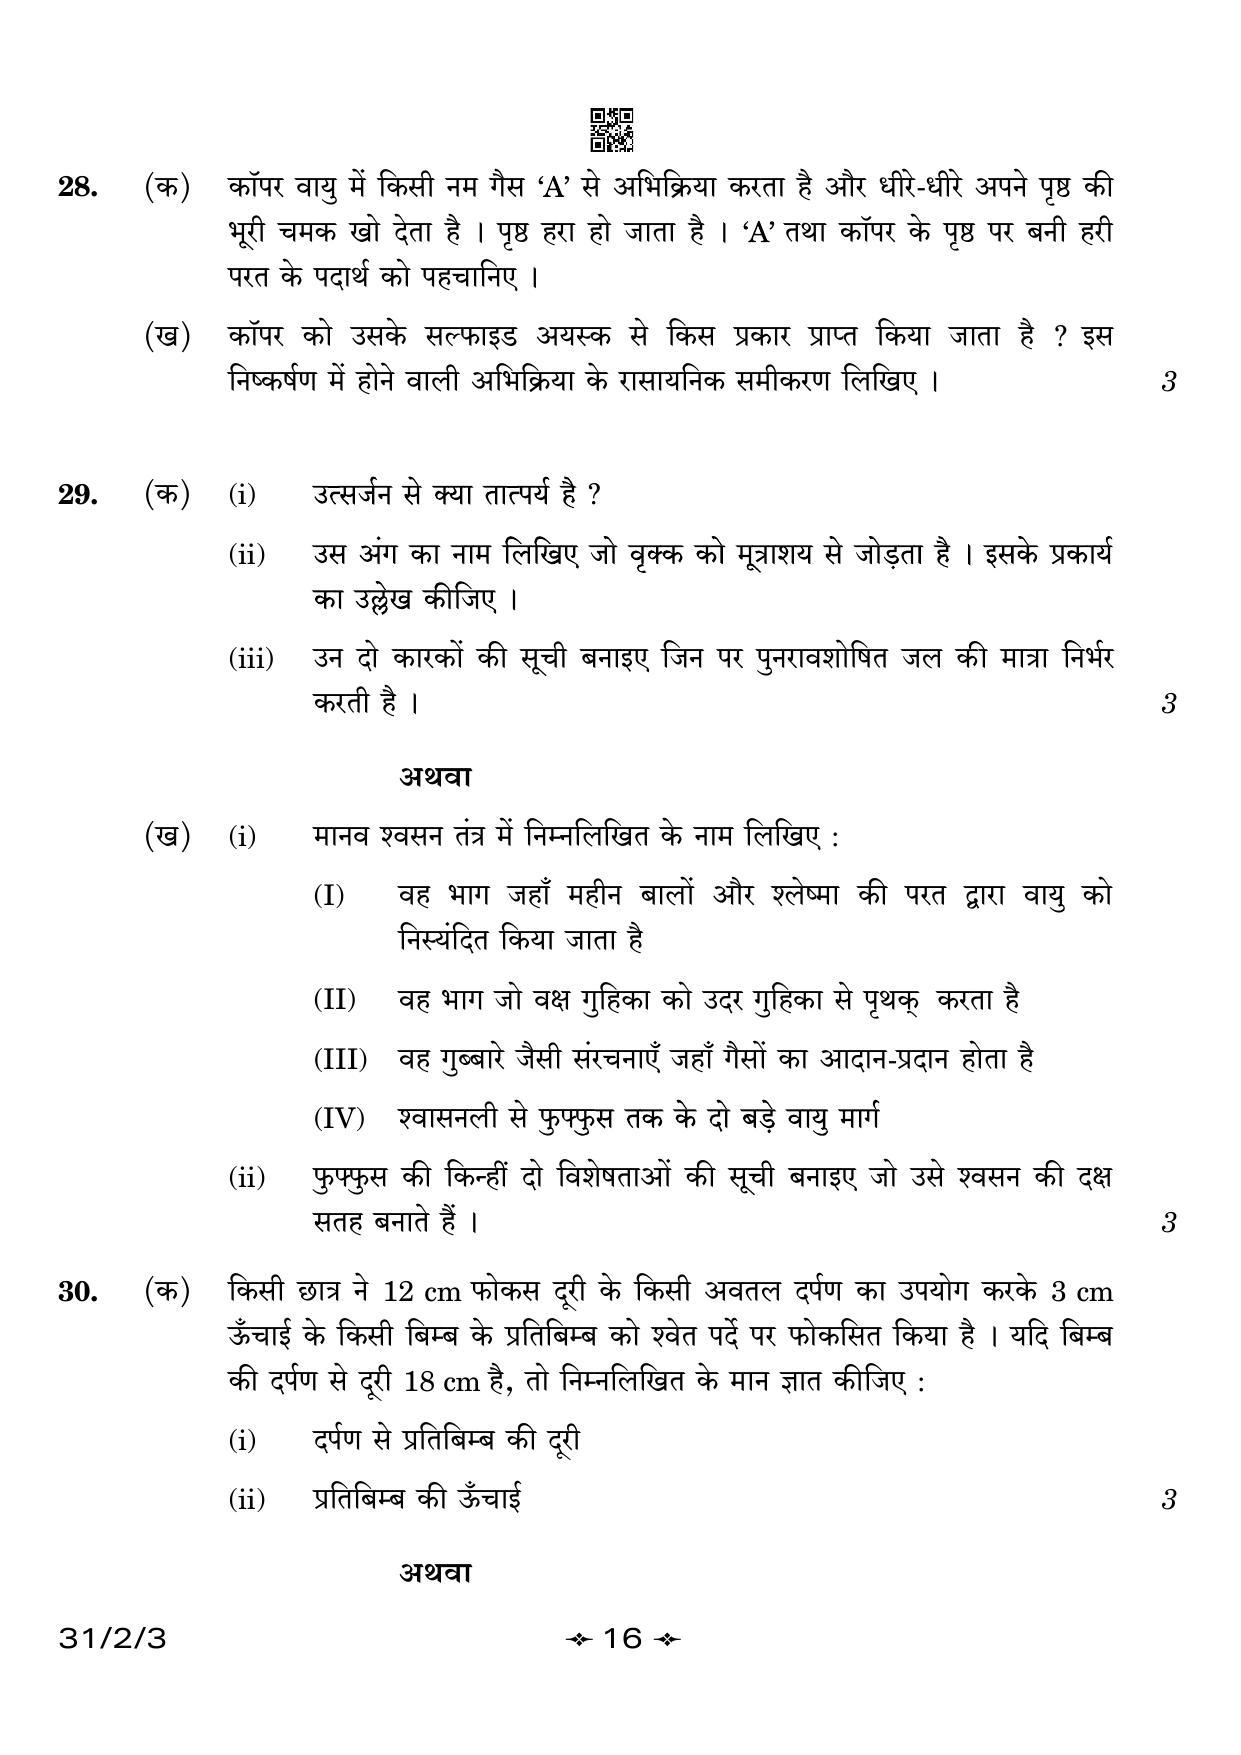 CBSE Class 10 31-2-3 Science 2023 Question Paper - Page 16